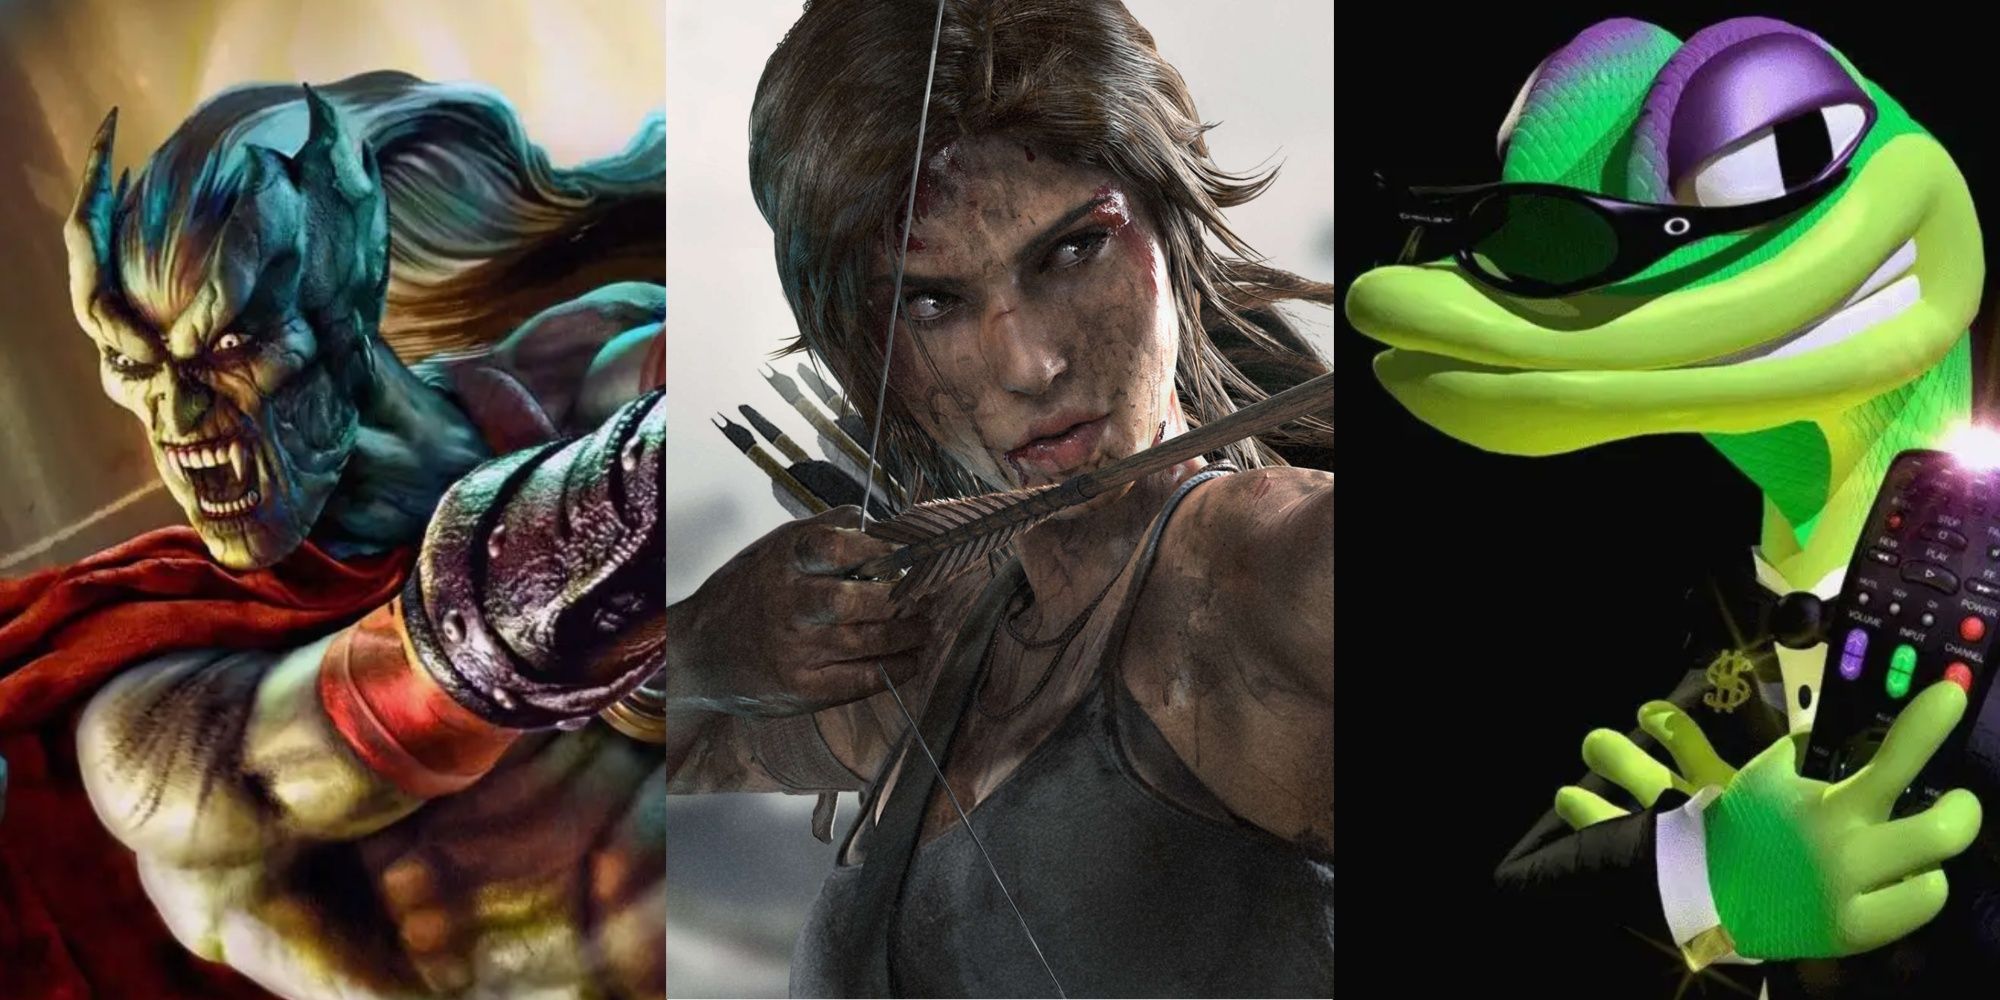 Kain, Lara Croft, and Gex next to one another in a collage 